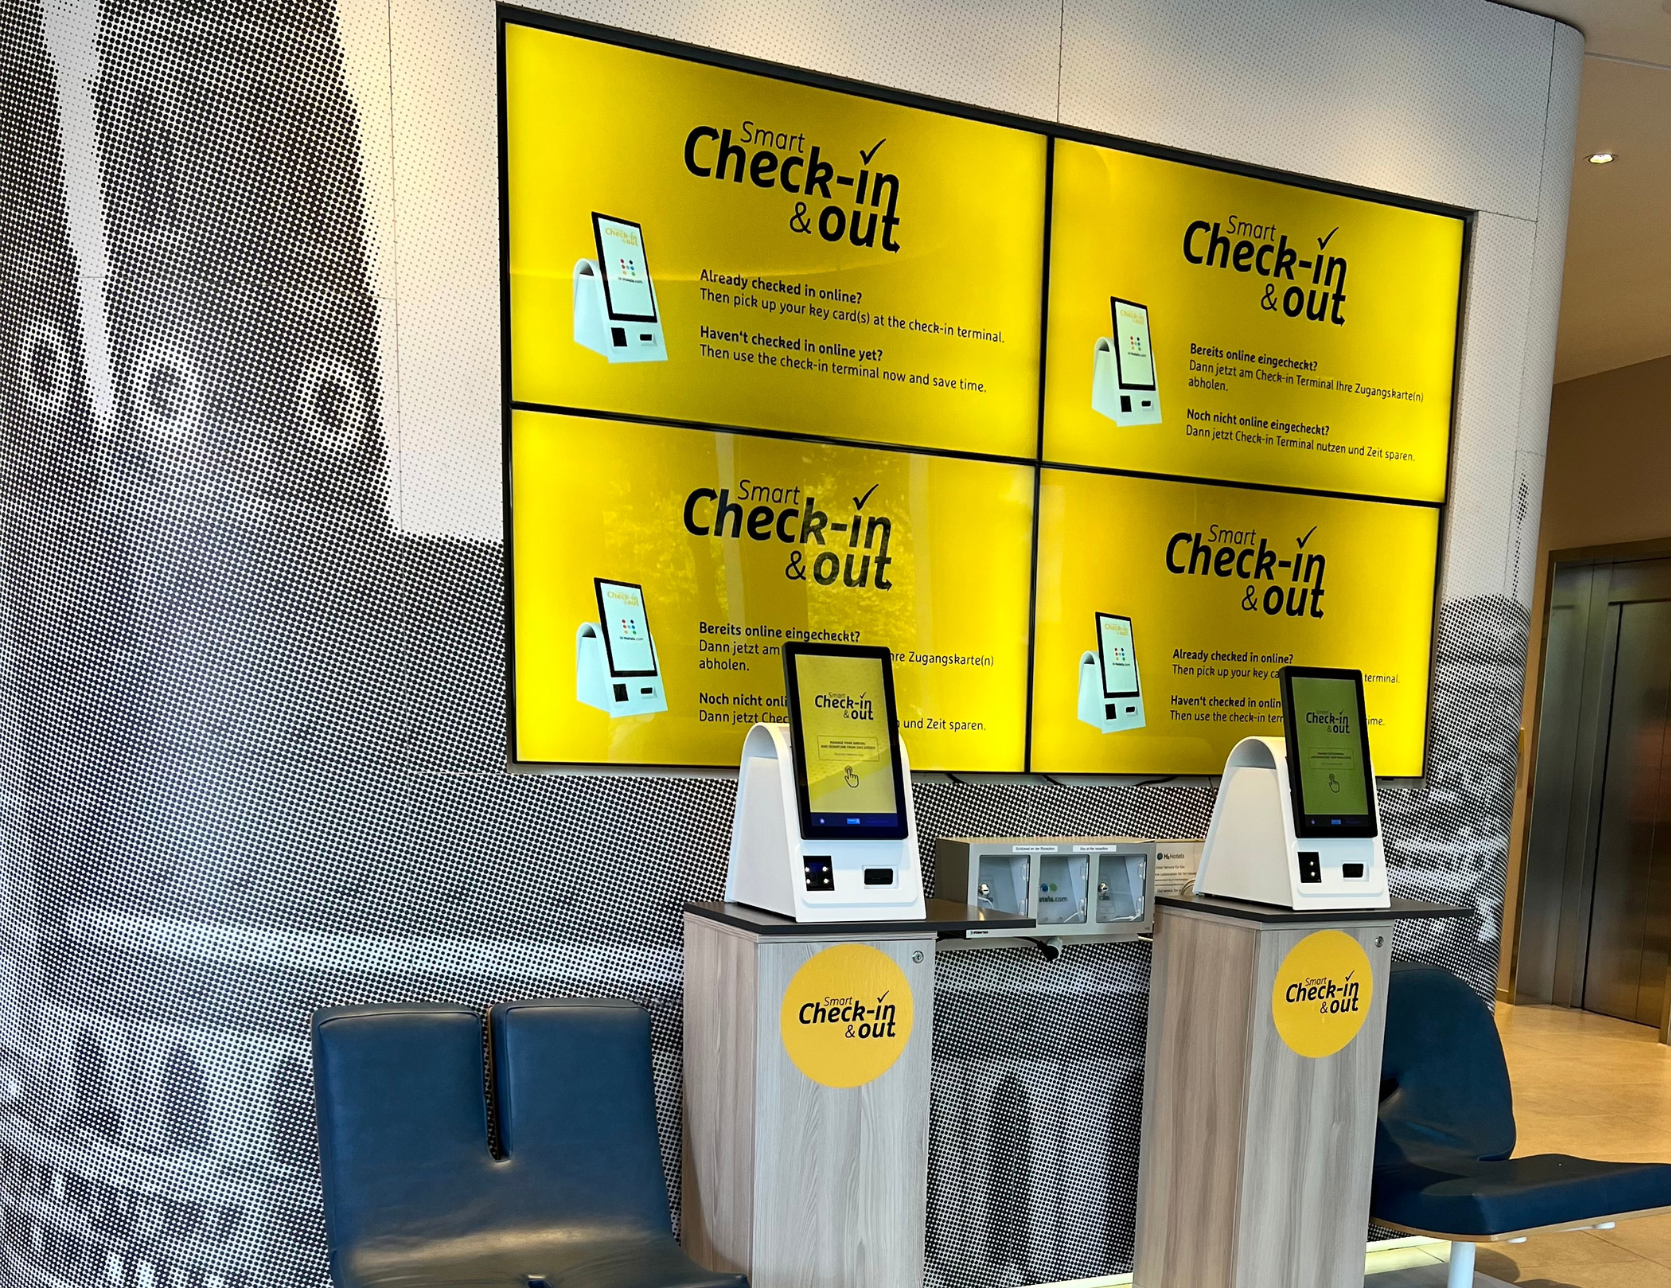 How Signage helps self-check-in?